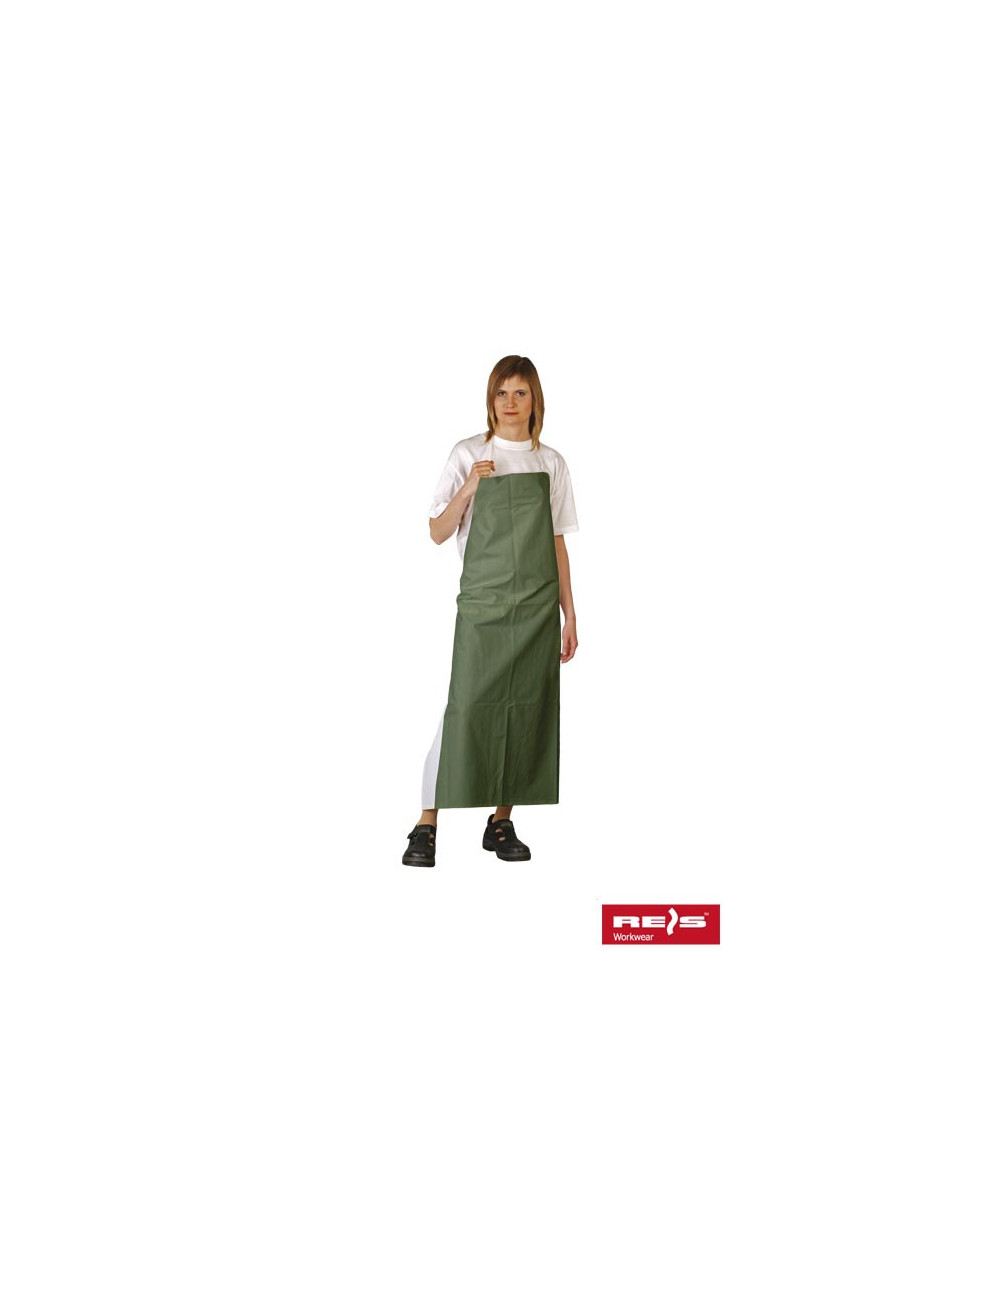 Protective apron fpcvlux with green Reis